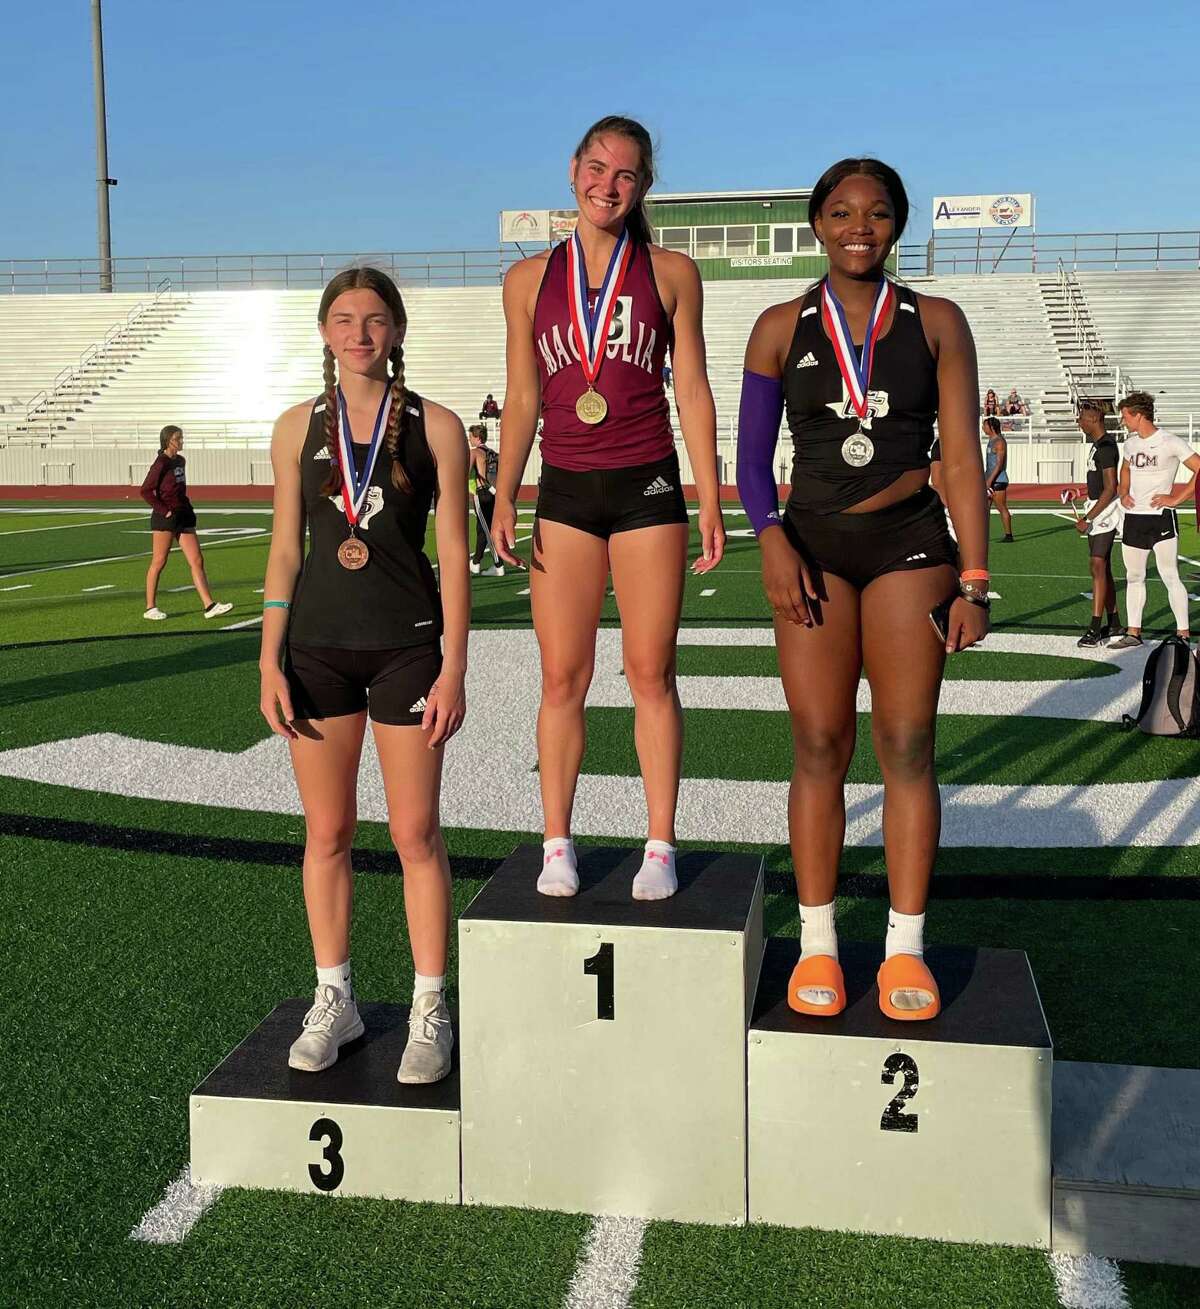 Magnolia's Whitney Harper set the school record in 100-meter hurdles to win gold at the District 19-5A track meet on Wednesday April 13, 2022 in Brenham.